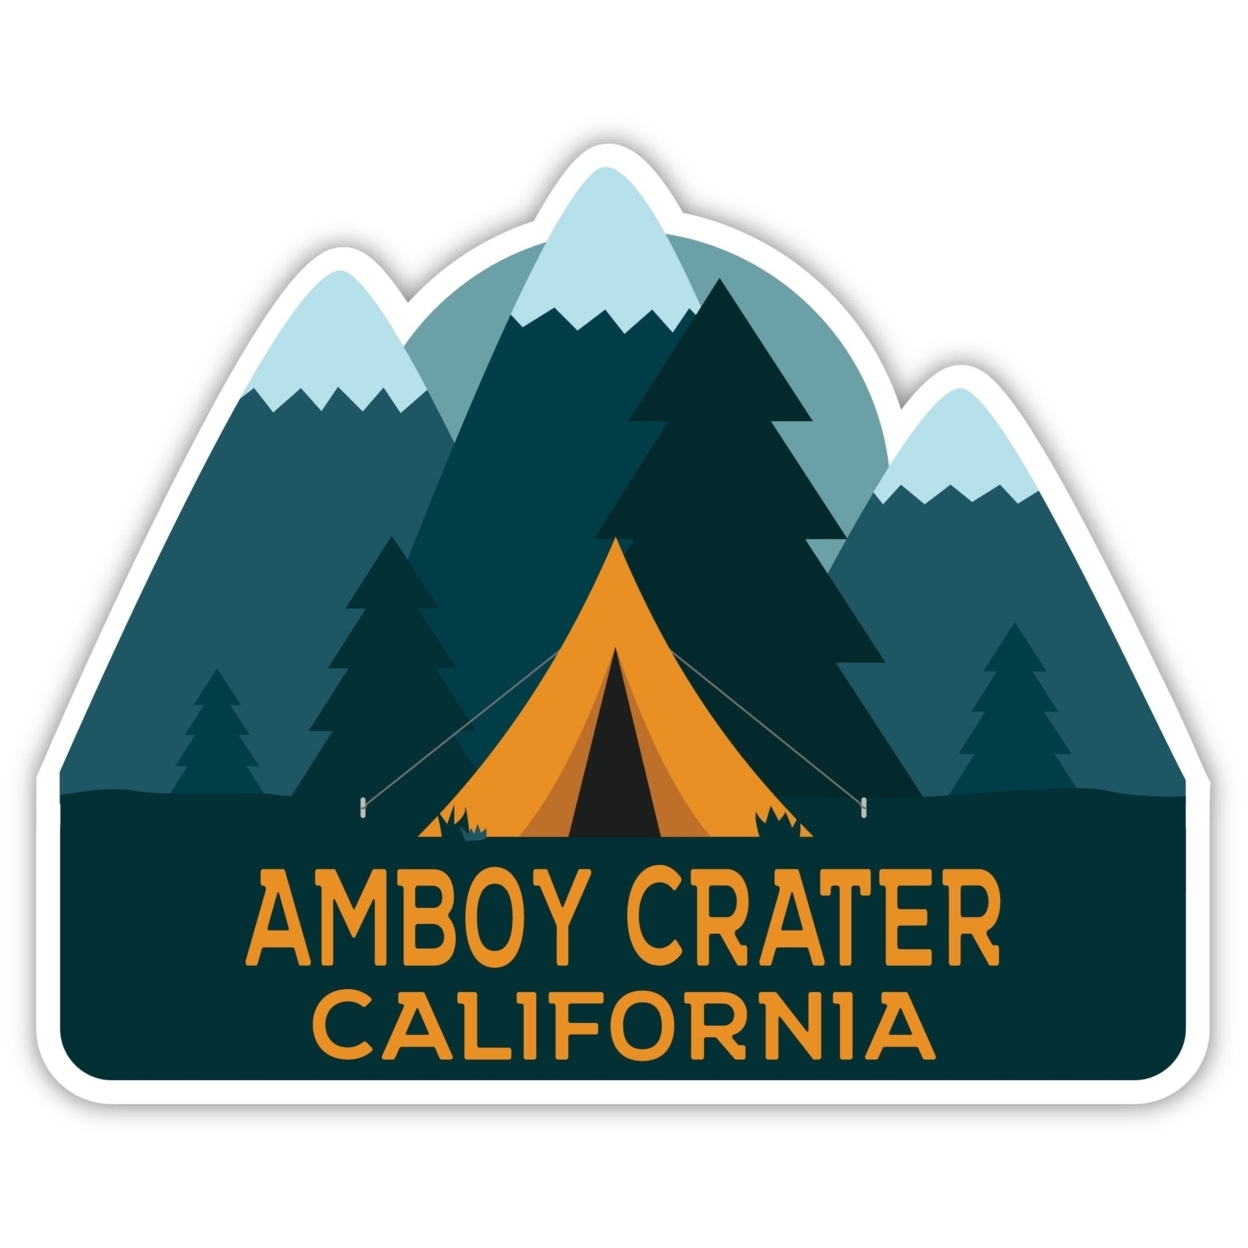 Amboy Crater California Souvenir Decorative Stickers (Choose Theme And Size) - 4-Pack, 10-Inch, Tent